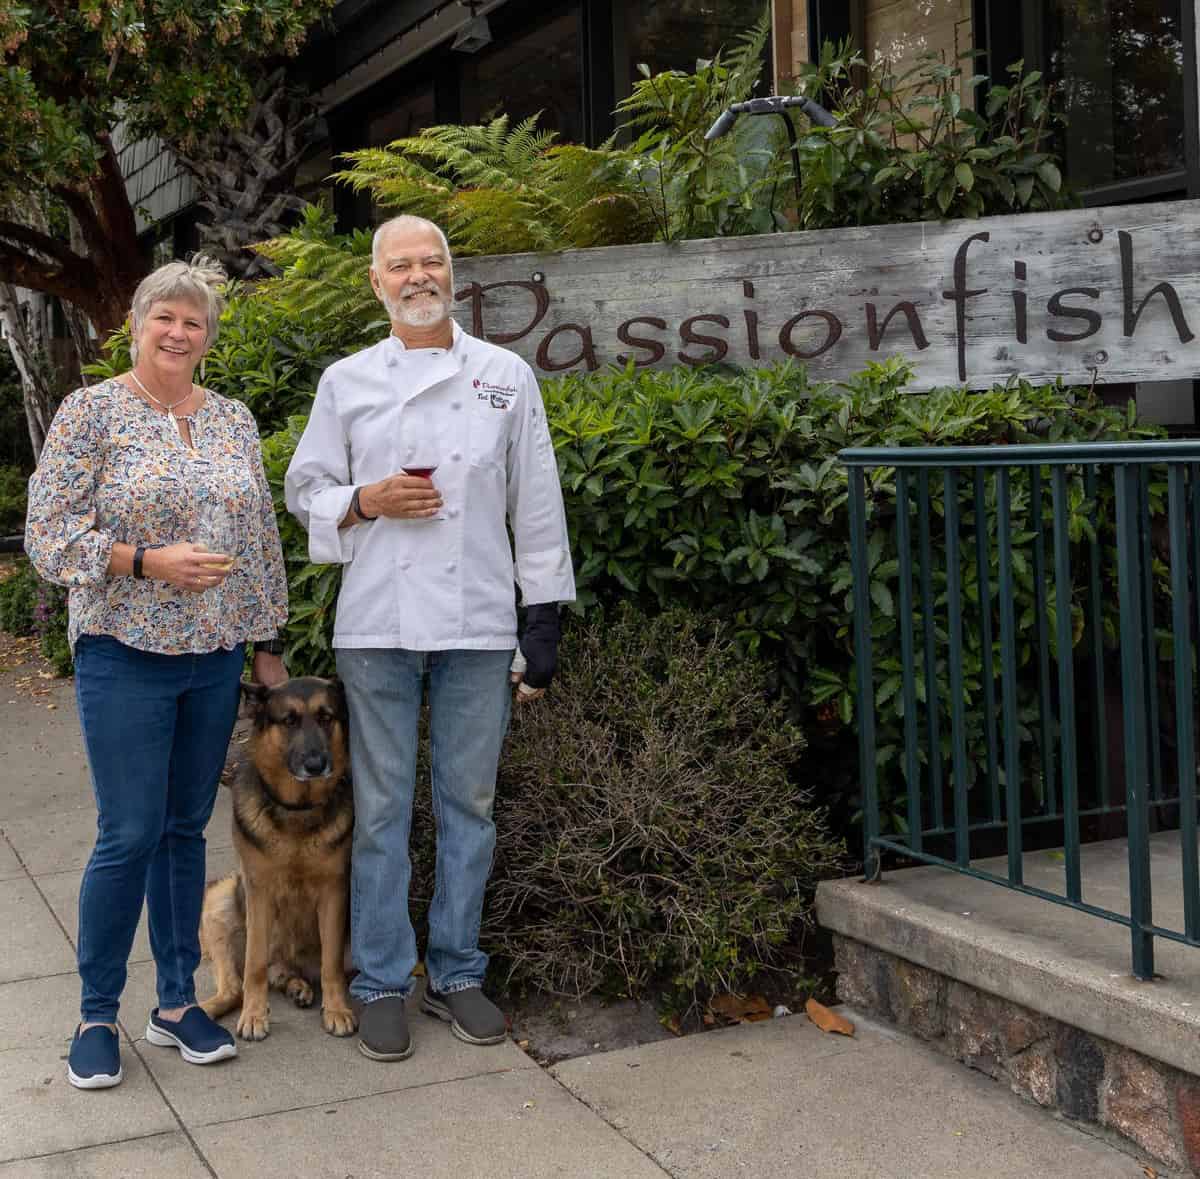 Owners of Passionfish, a Monterey Seafood restaurant owned by Ted and Cindy Walter